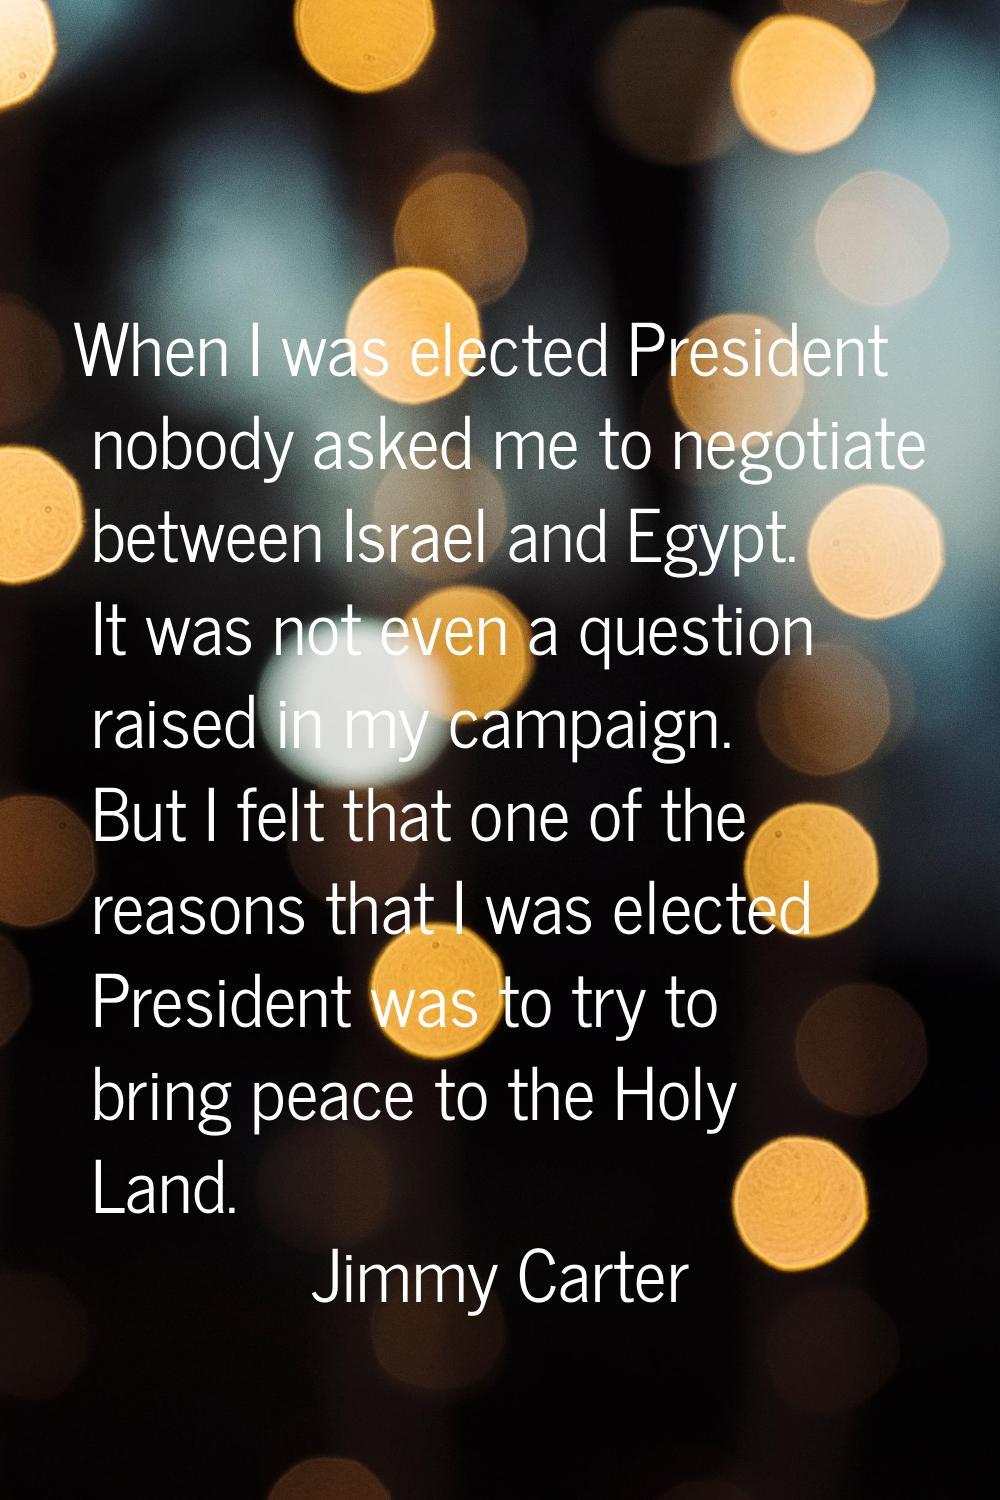 When I was elected President nobody asked me to negotiate between Israel and Egypt. It was not even